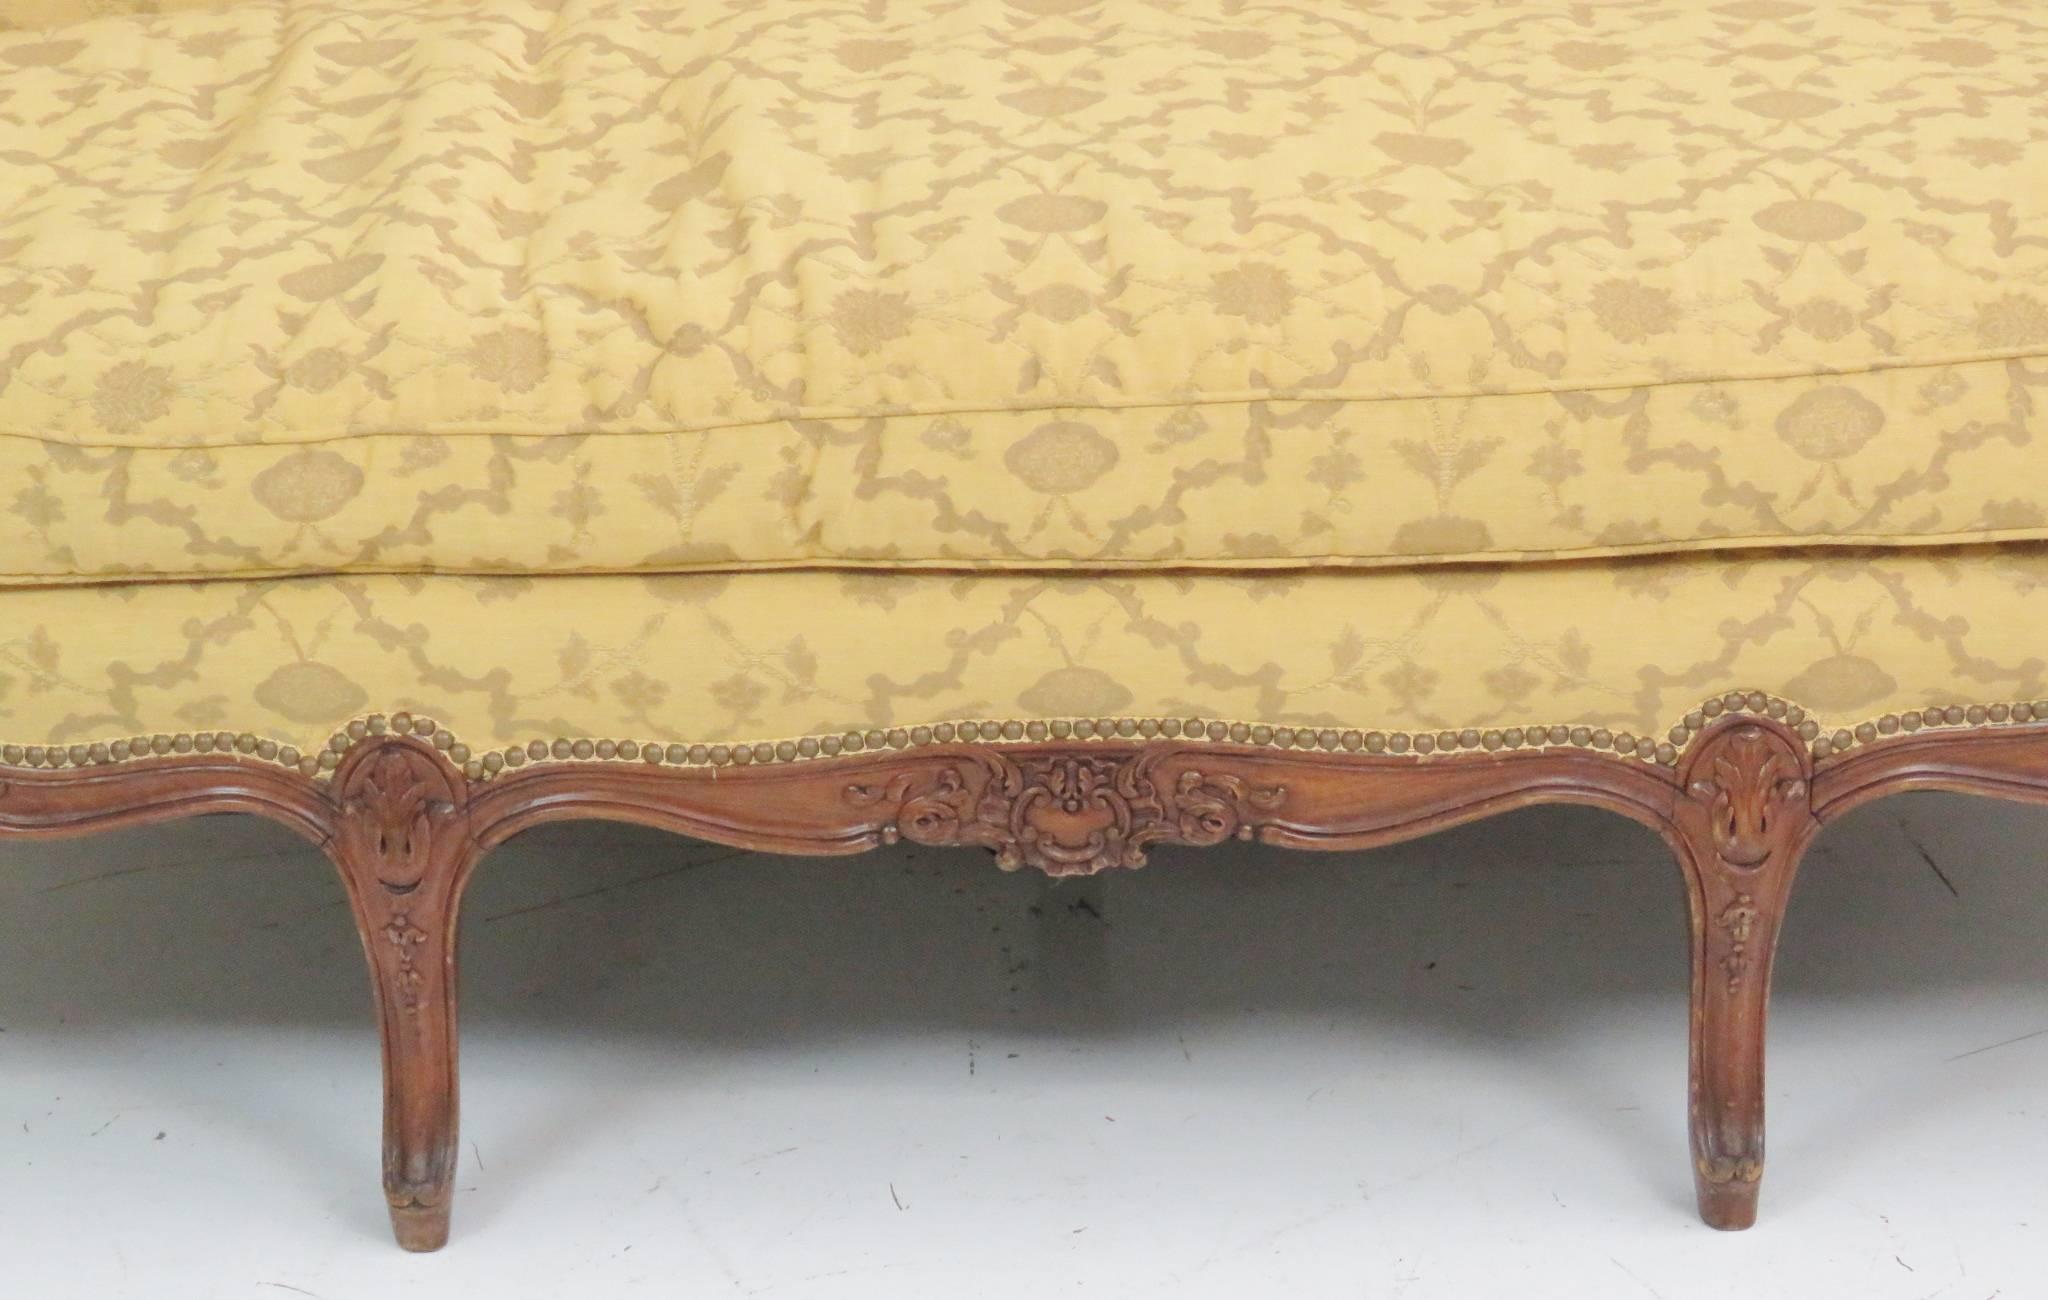 Carved walnut frame. Yellow decorative upholstery.